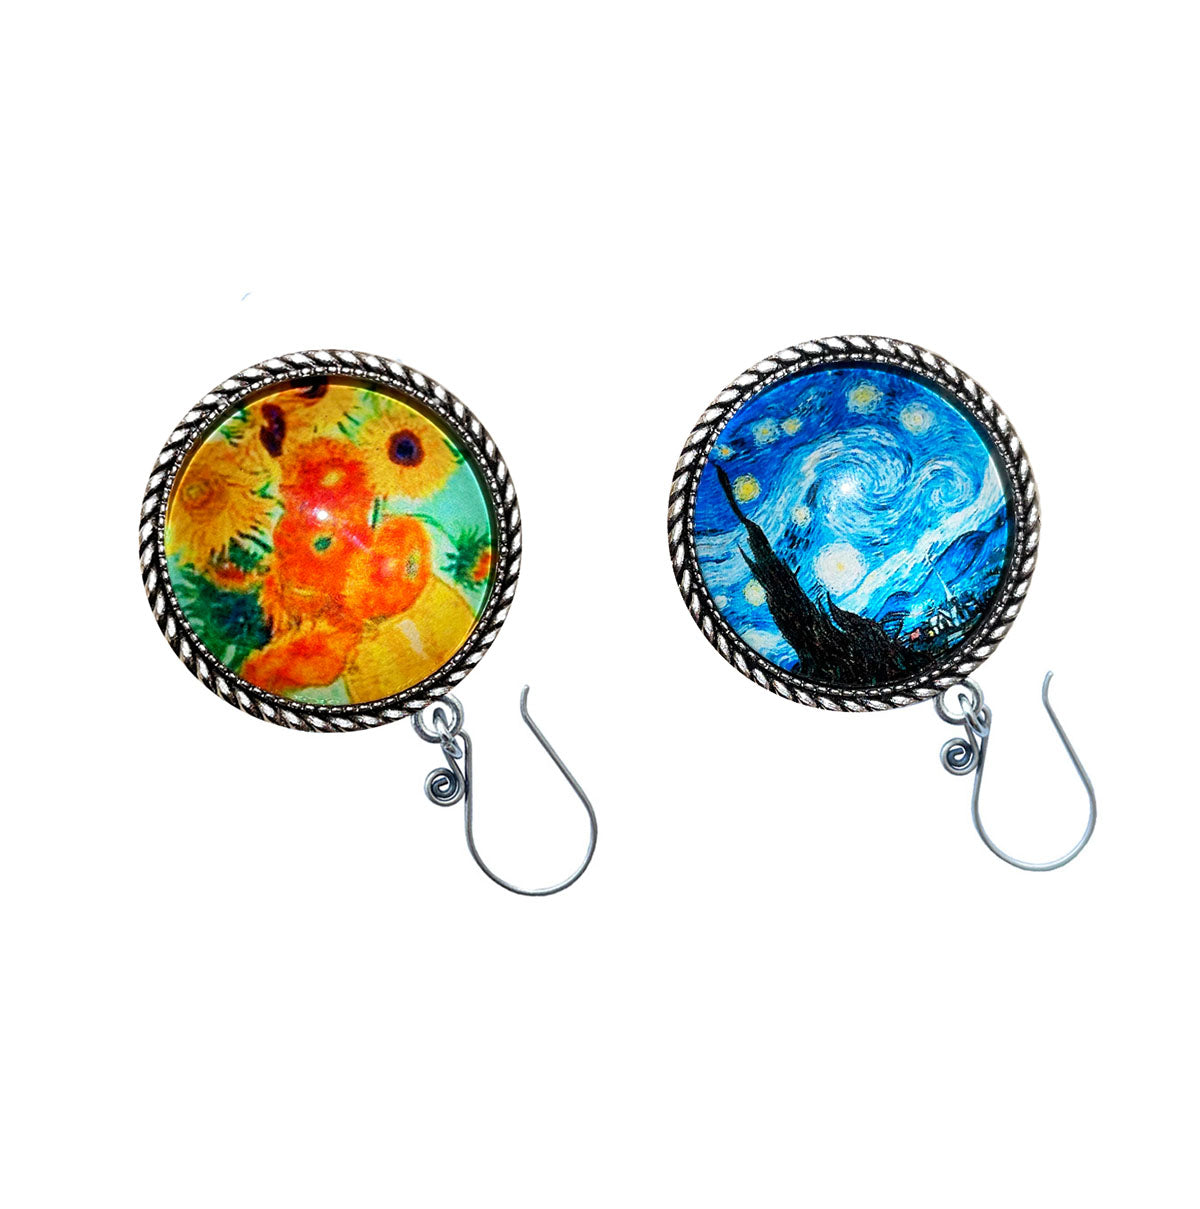 lovielf 925 Silver Portuguese Knitting Pin for Knitters with Teal Bohemian The Starry Night Sunflower Vincent Van Gogh Design- Magnetic | 2 pcs (Van Gogh)